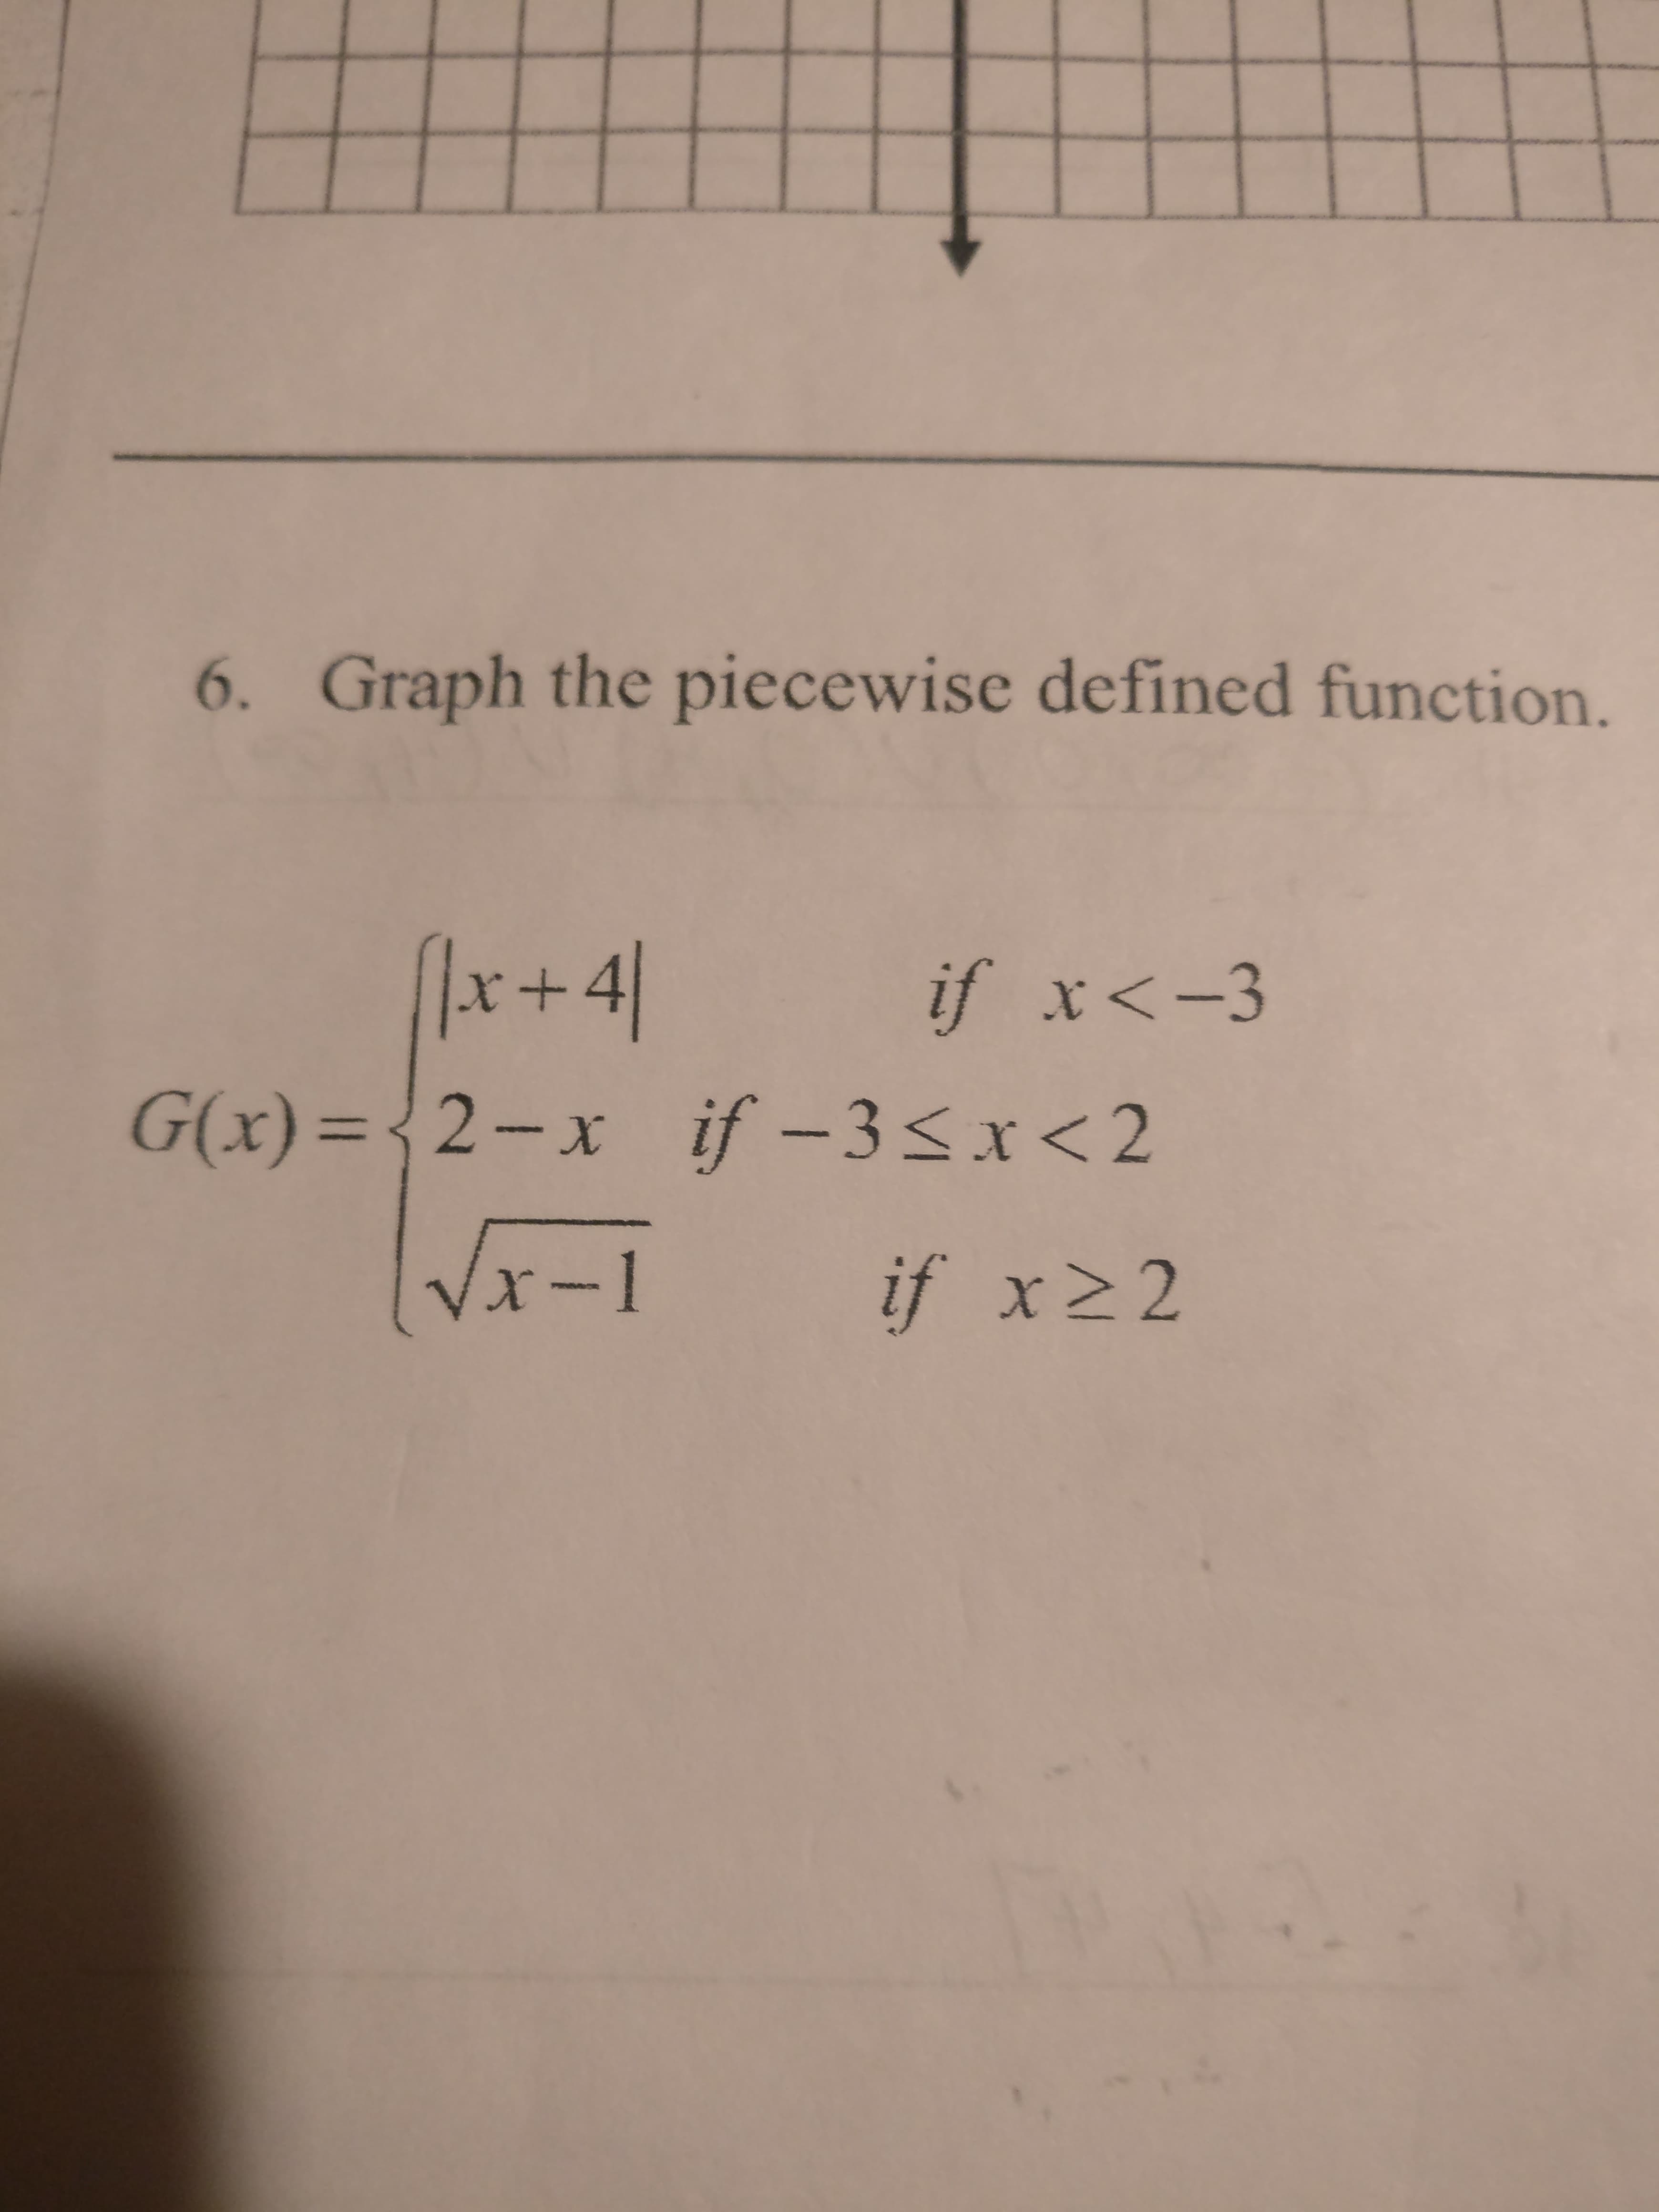 6. Graph the piecewise defined function.
1x+4]
if x<-3
G(x)={2-x if -3<x<2
Vx-1
if x>2
